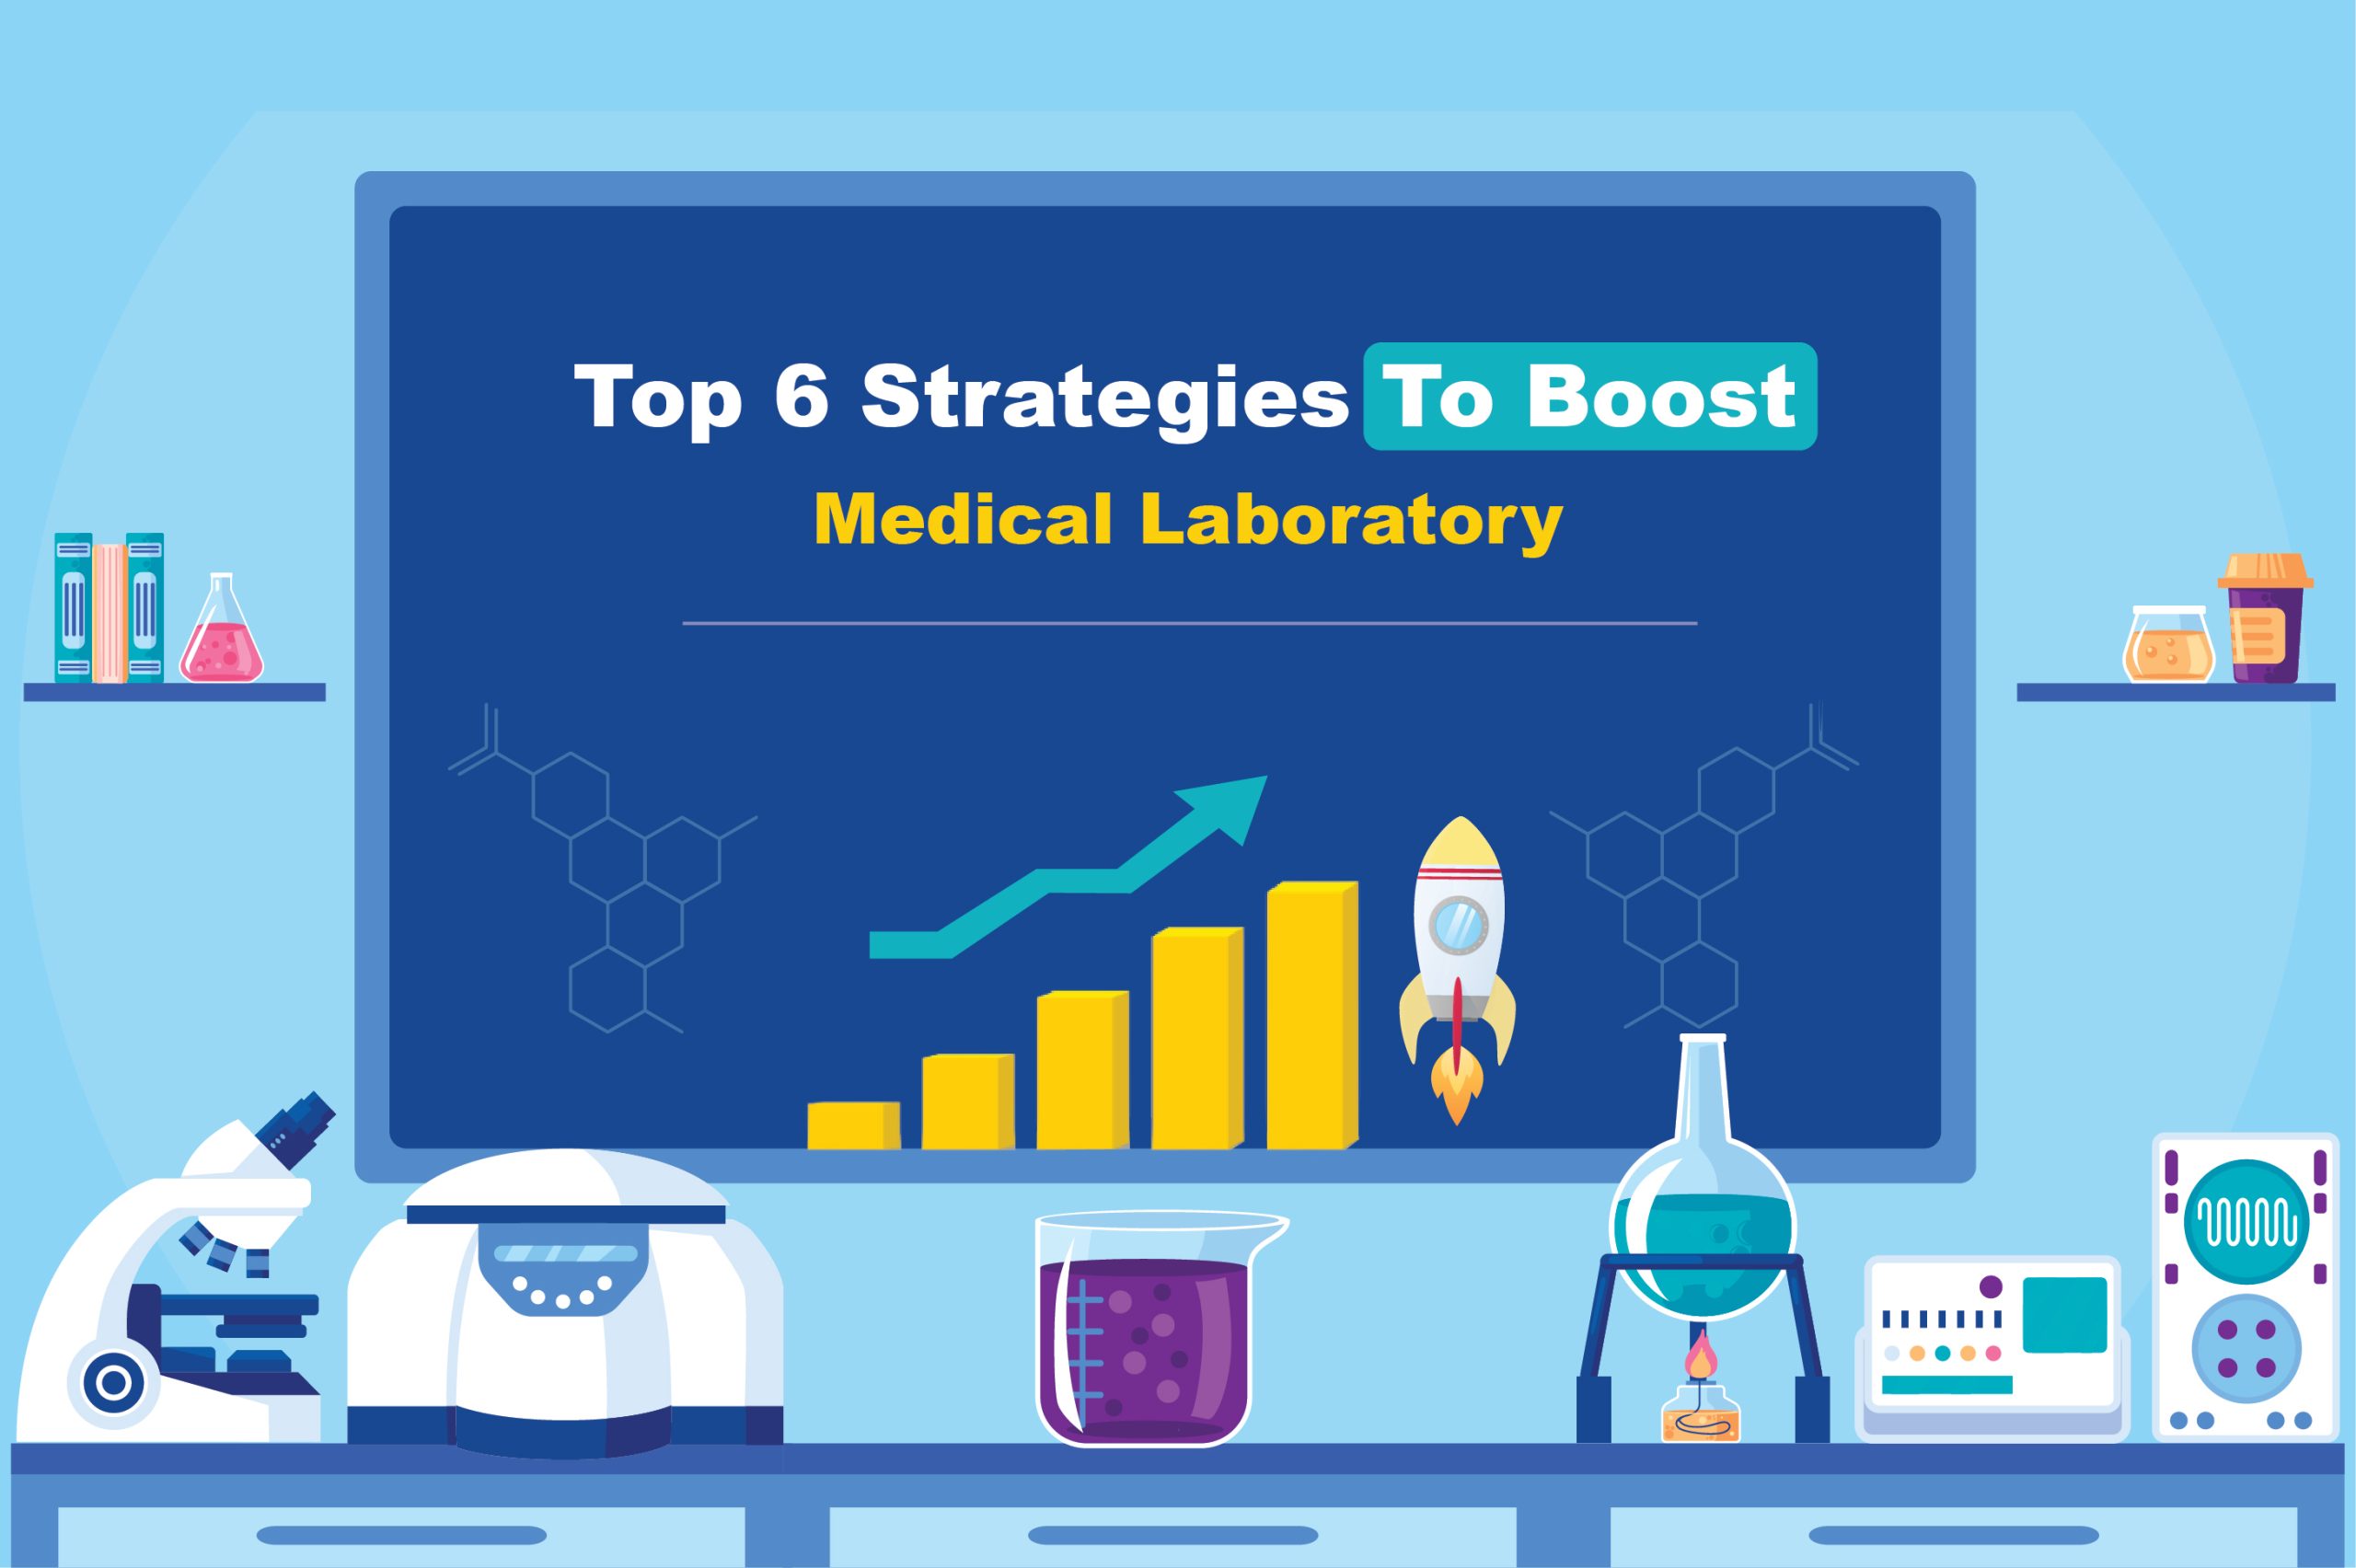 Top 6 Strategies to Boost Medical Laboratory scaled